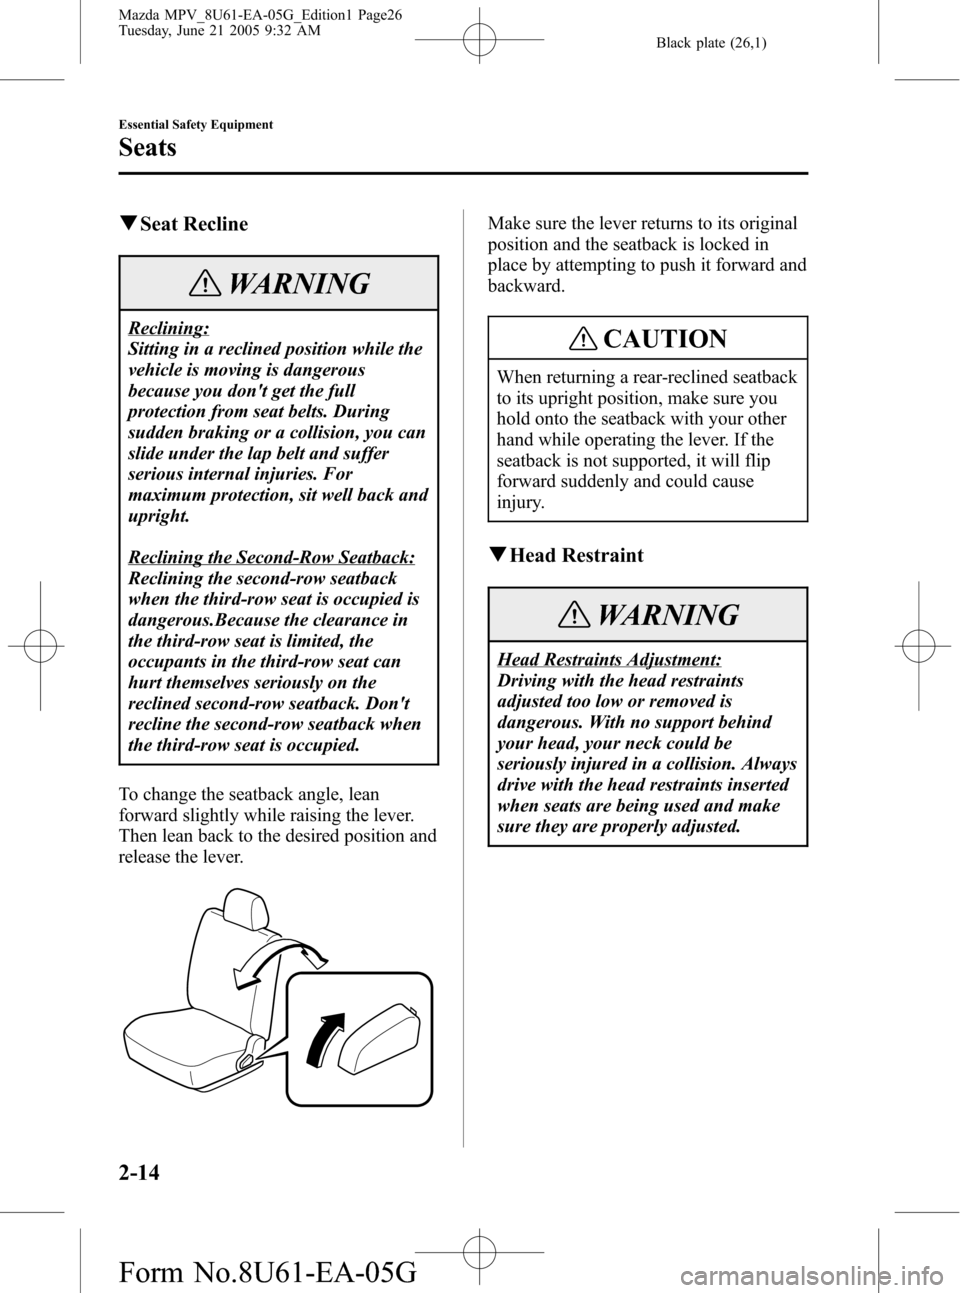 MAZDA MODEL MPV 2006  Owners Manual (in English) Black plate (26,1)
qSeat Recline
WARNING
Reclining:
Sitting in a reclined position while the
vehicle is moving is dangerous
because you dont get the full
protection from seat belts. During
sudden bra